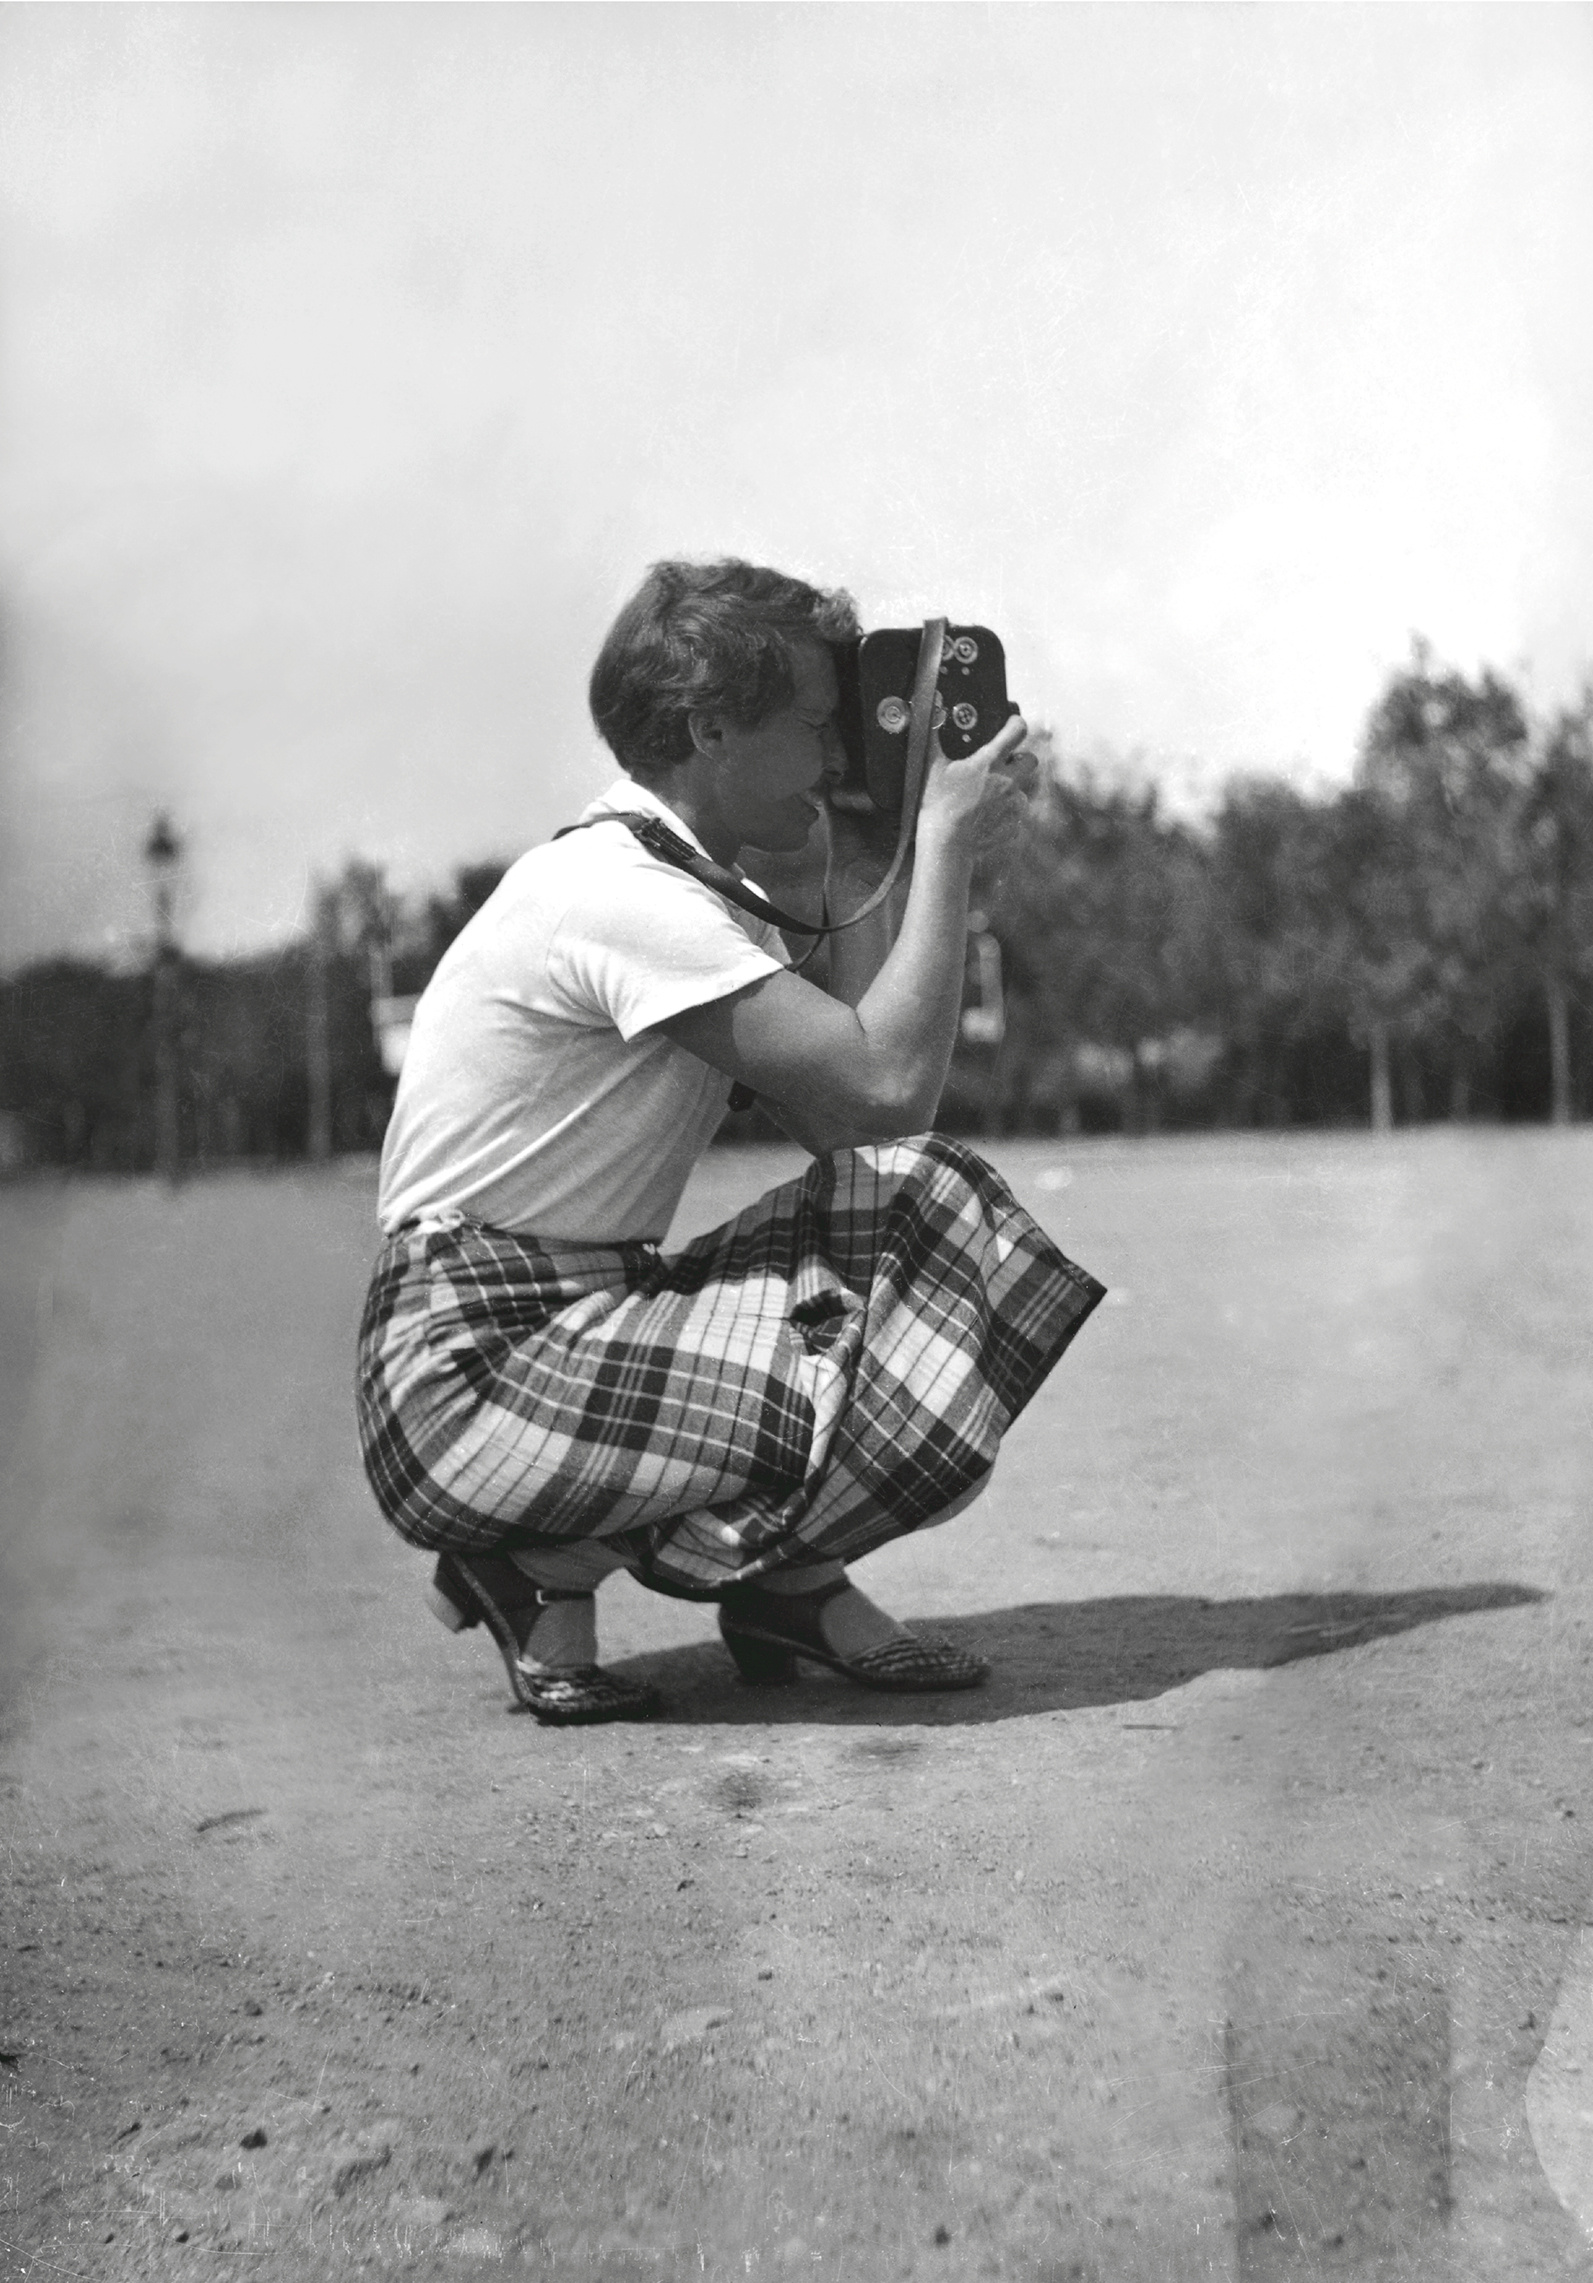 The black and white photograph shows a woman in squatting position with a camera.